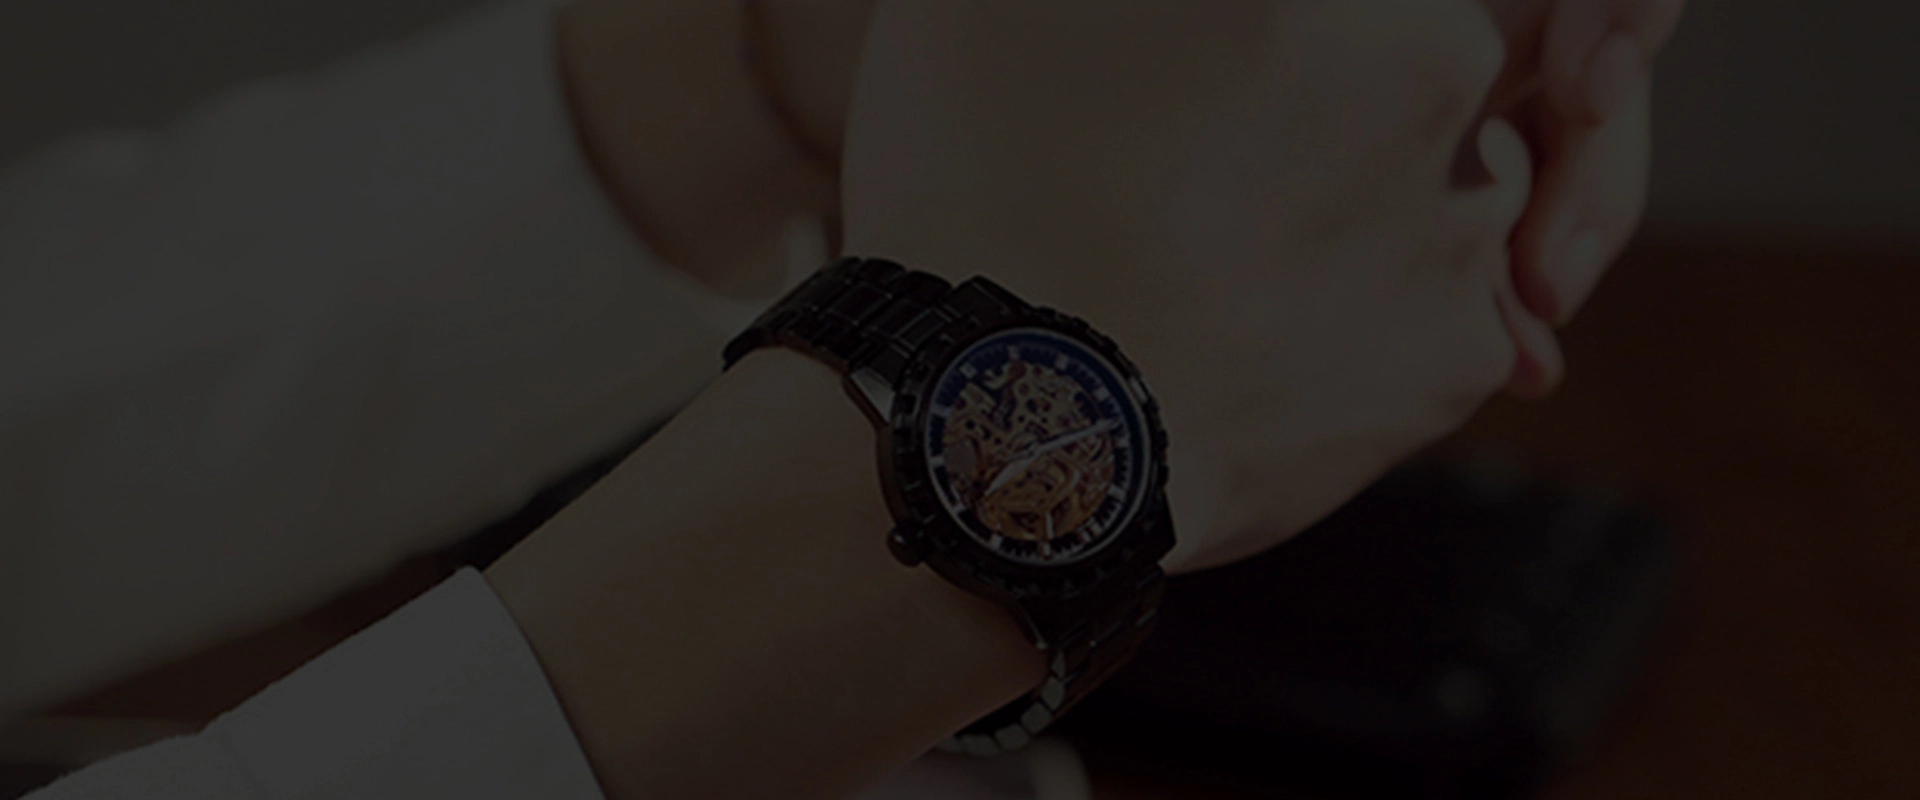 FAQs of Carisen Watches & Accessory